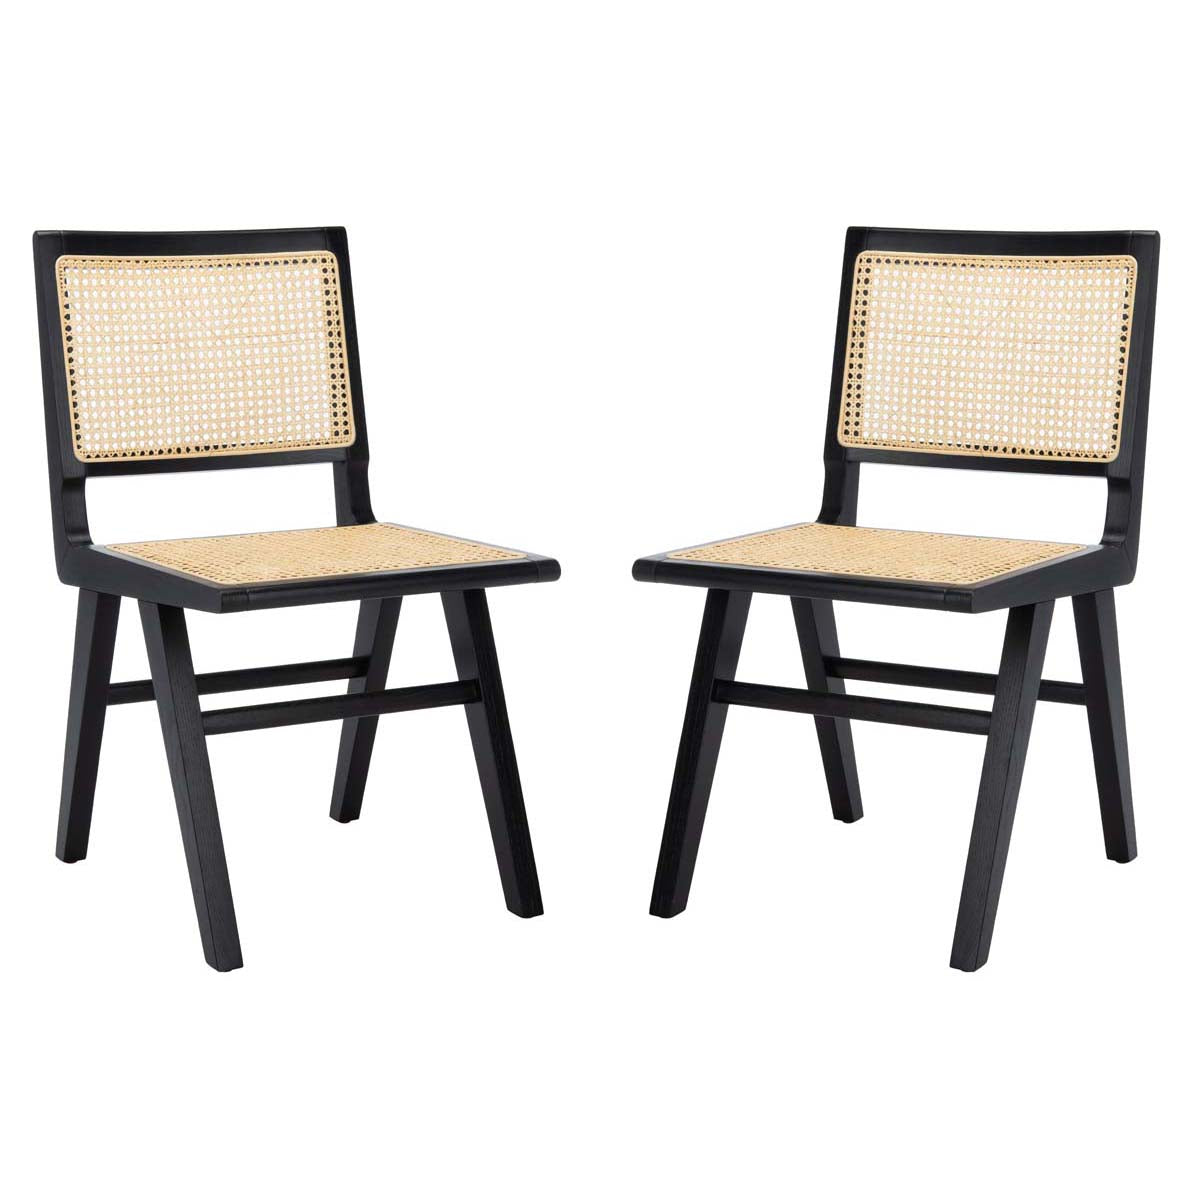 Safavieh Couture Hattie French Cane Dining Chair (Set of 2) - Black / Natural